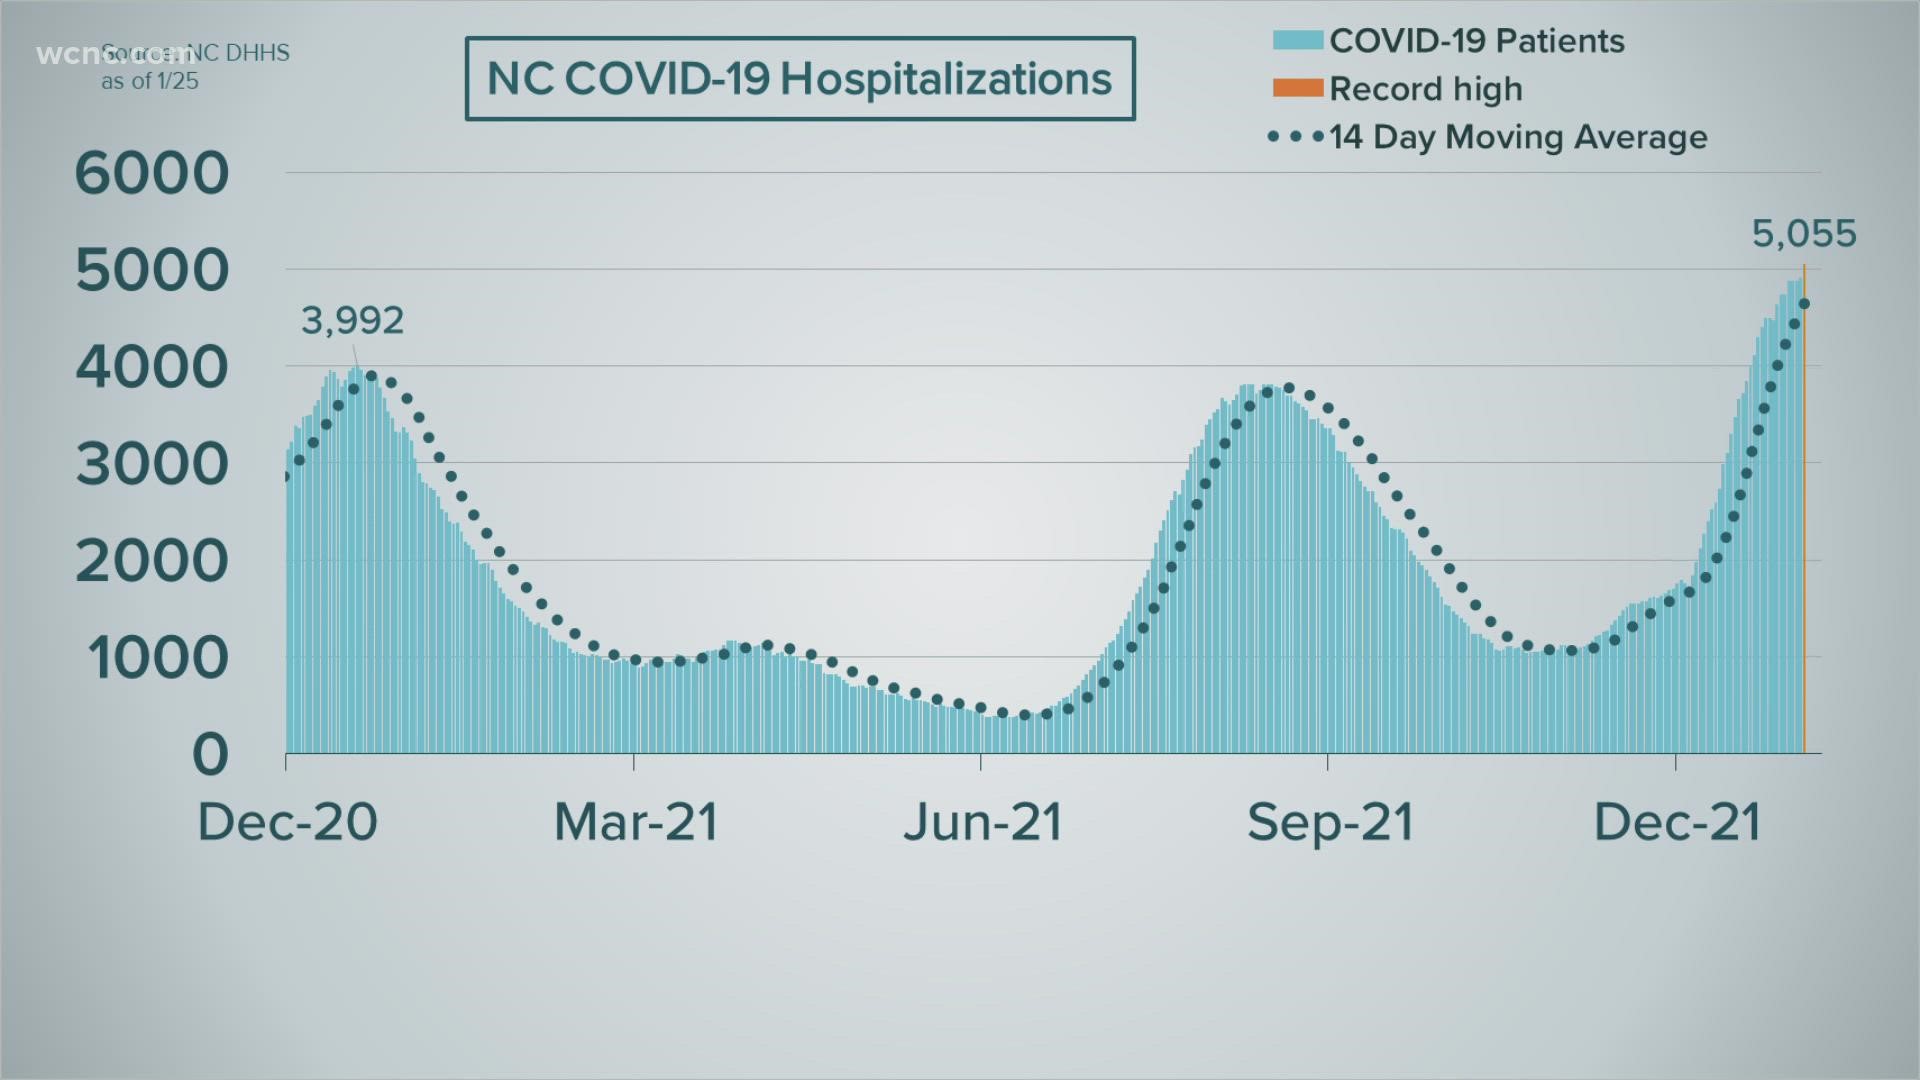 North Carolina has surpassed their peak high hospitalization record once again.